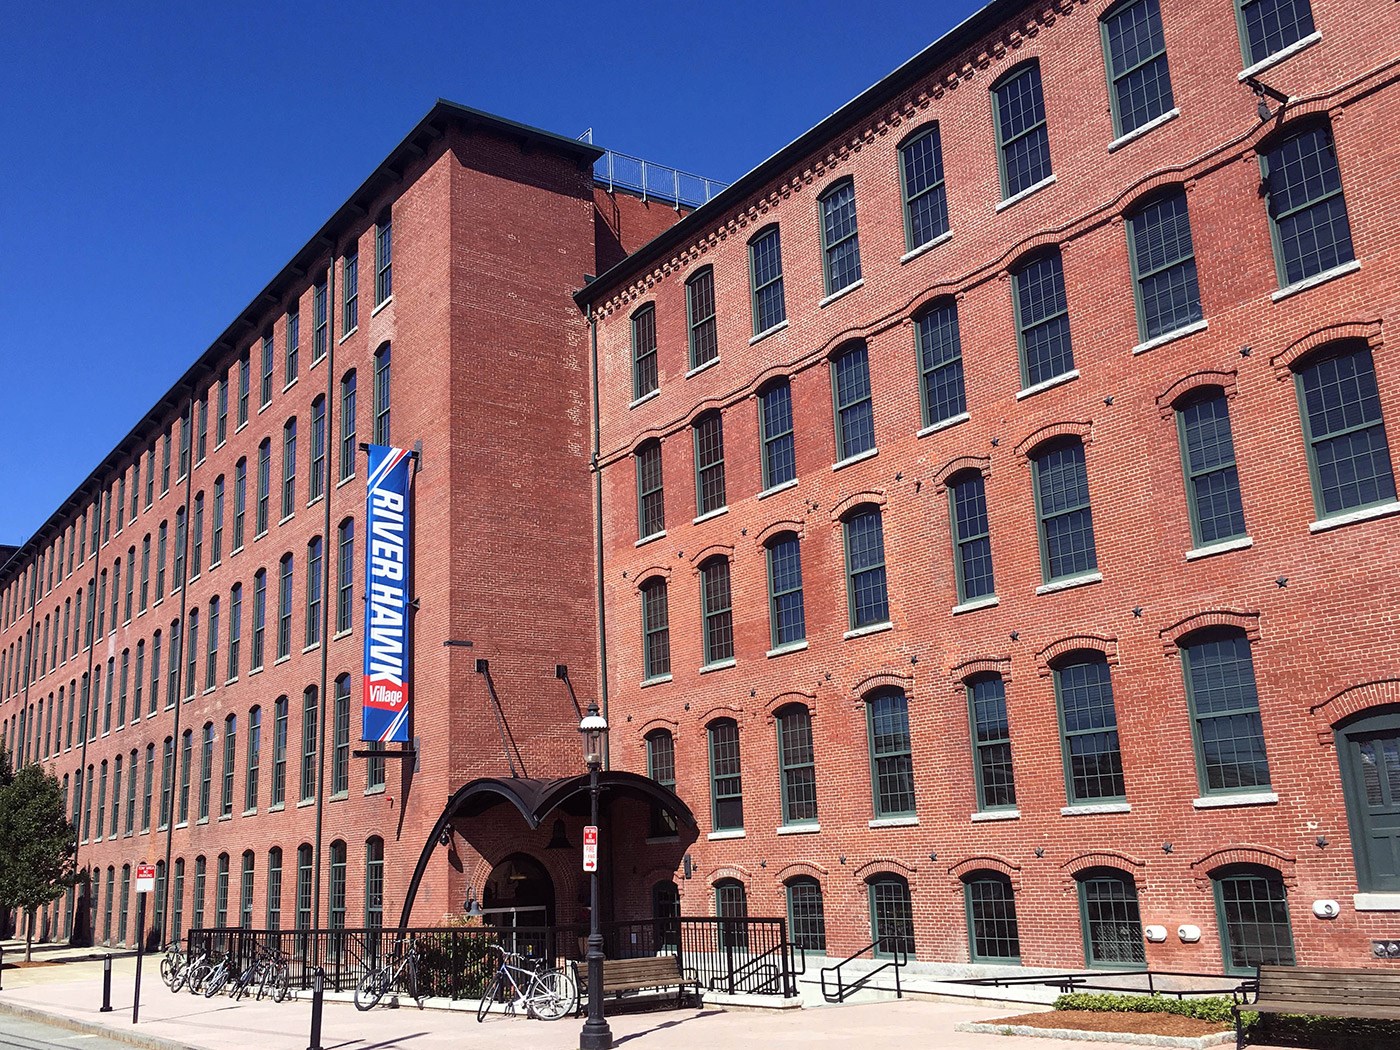 River Hawk Village at UMass Lowell offers various room options and configurations including: 4-person traditional units standard deluxe townhouse deluxe units with multilevel layouts free laundry in unit full kitchen (stovetop, oven, microwave, dishwasher, refrigerator & sink)